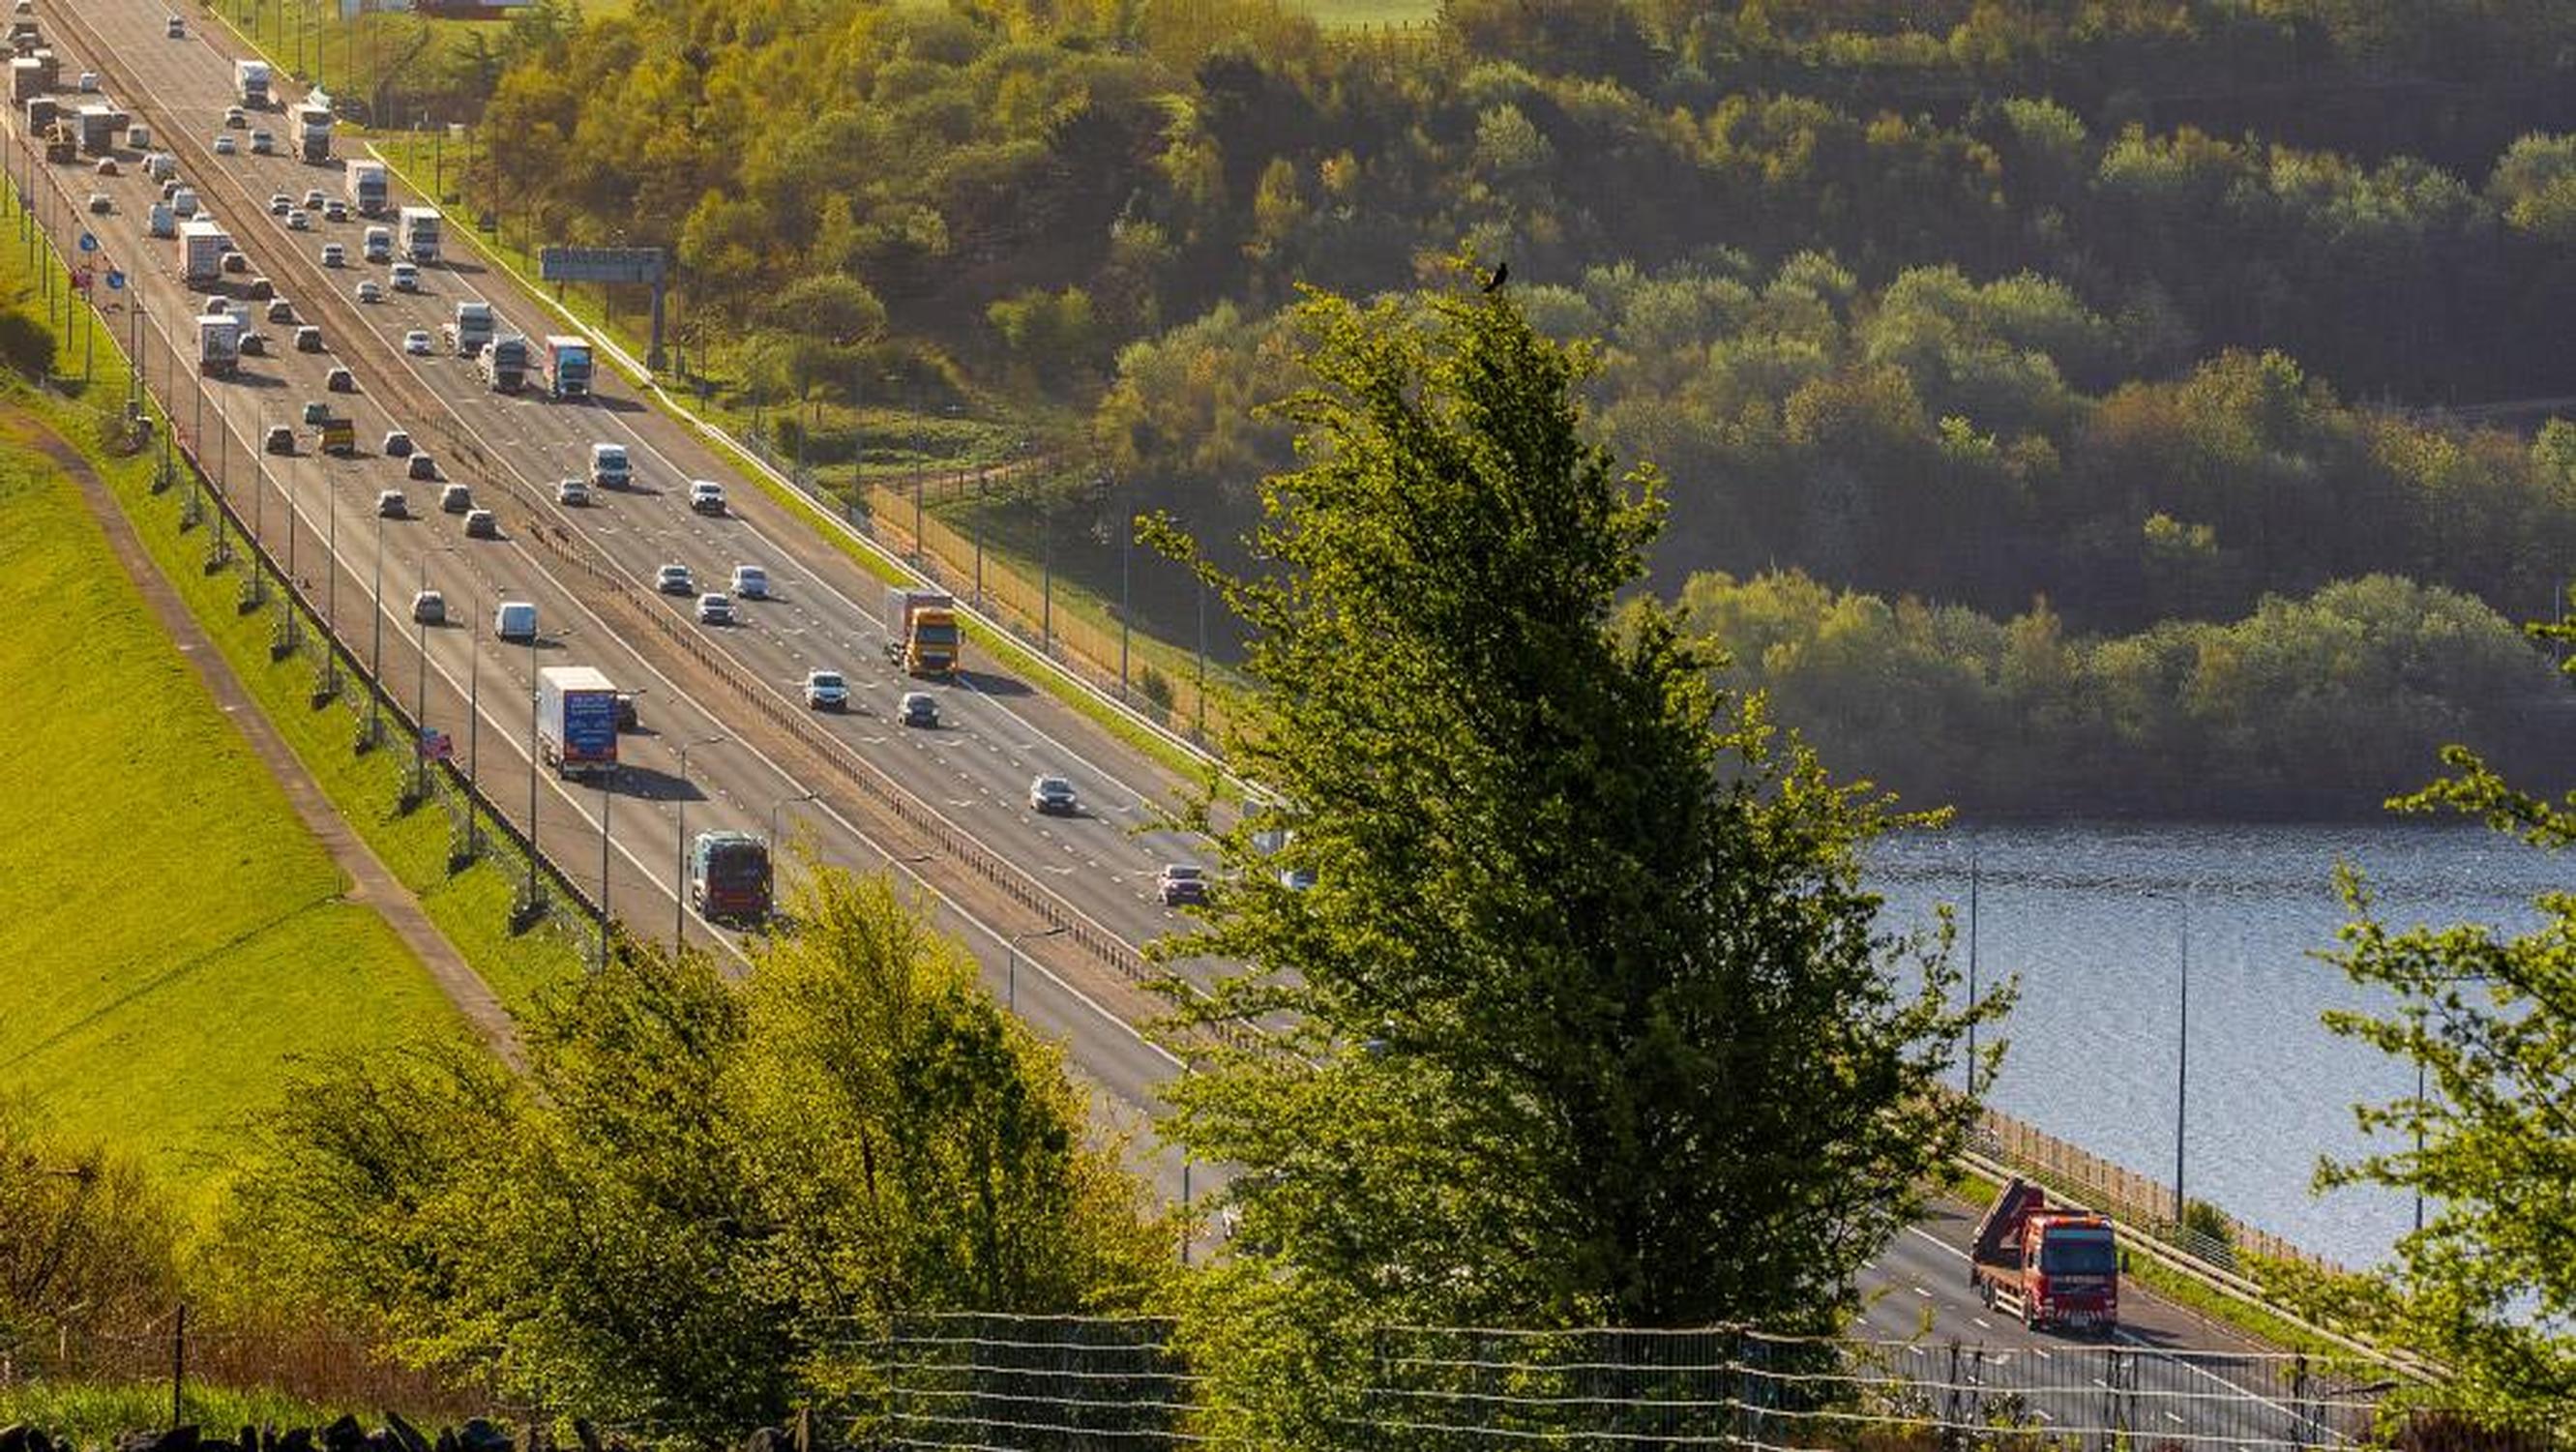 ORR’s annual report for 2020-21 found Highways England met all targets in its key performance indicators for providing fast and reliable journeys and maintaining the network